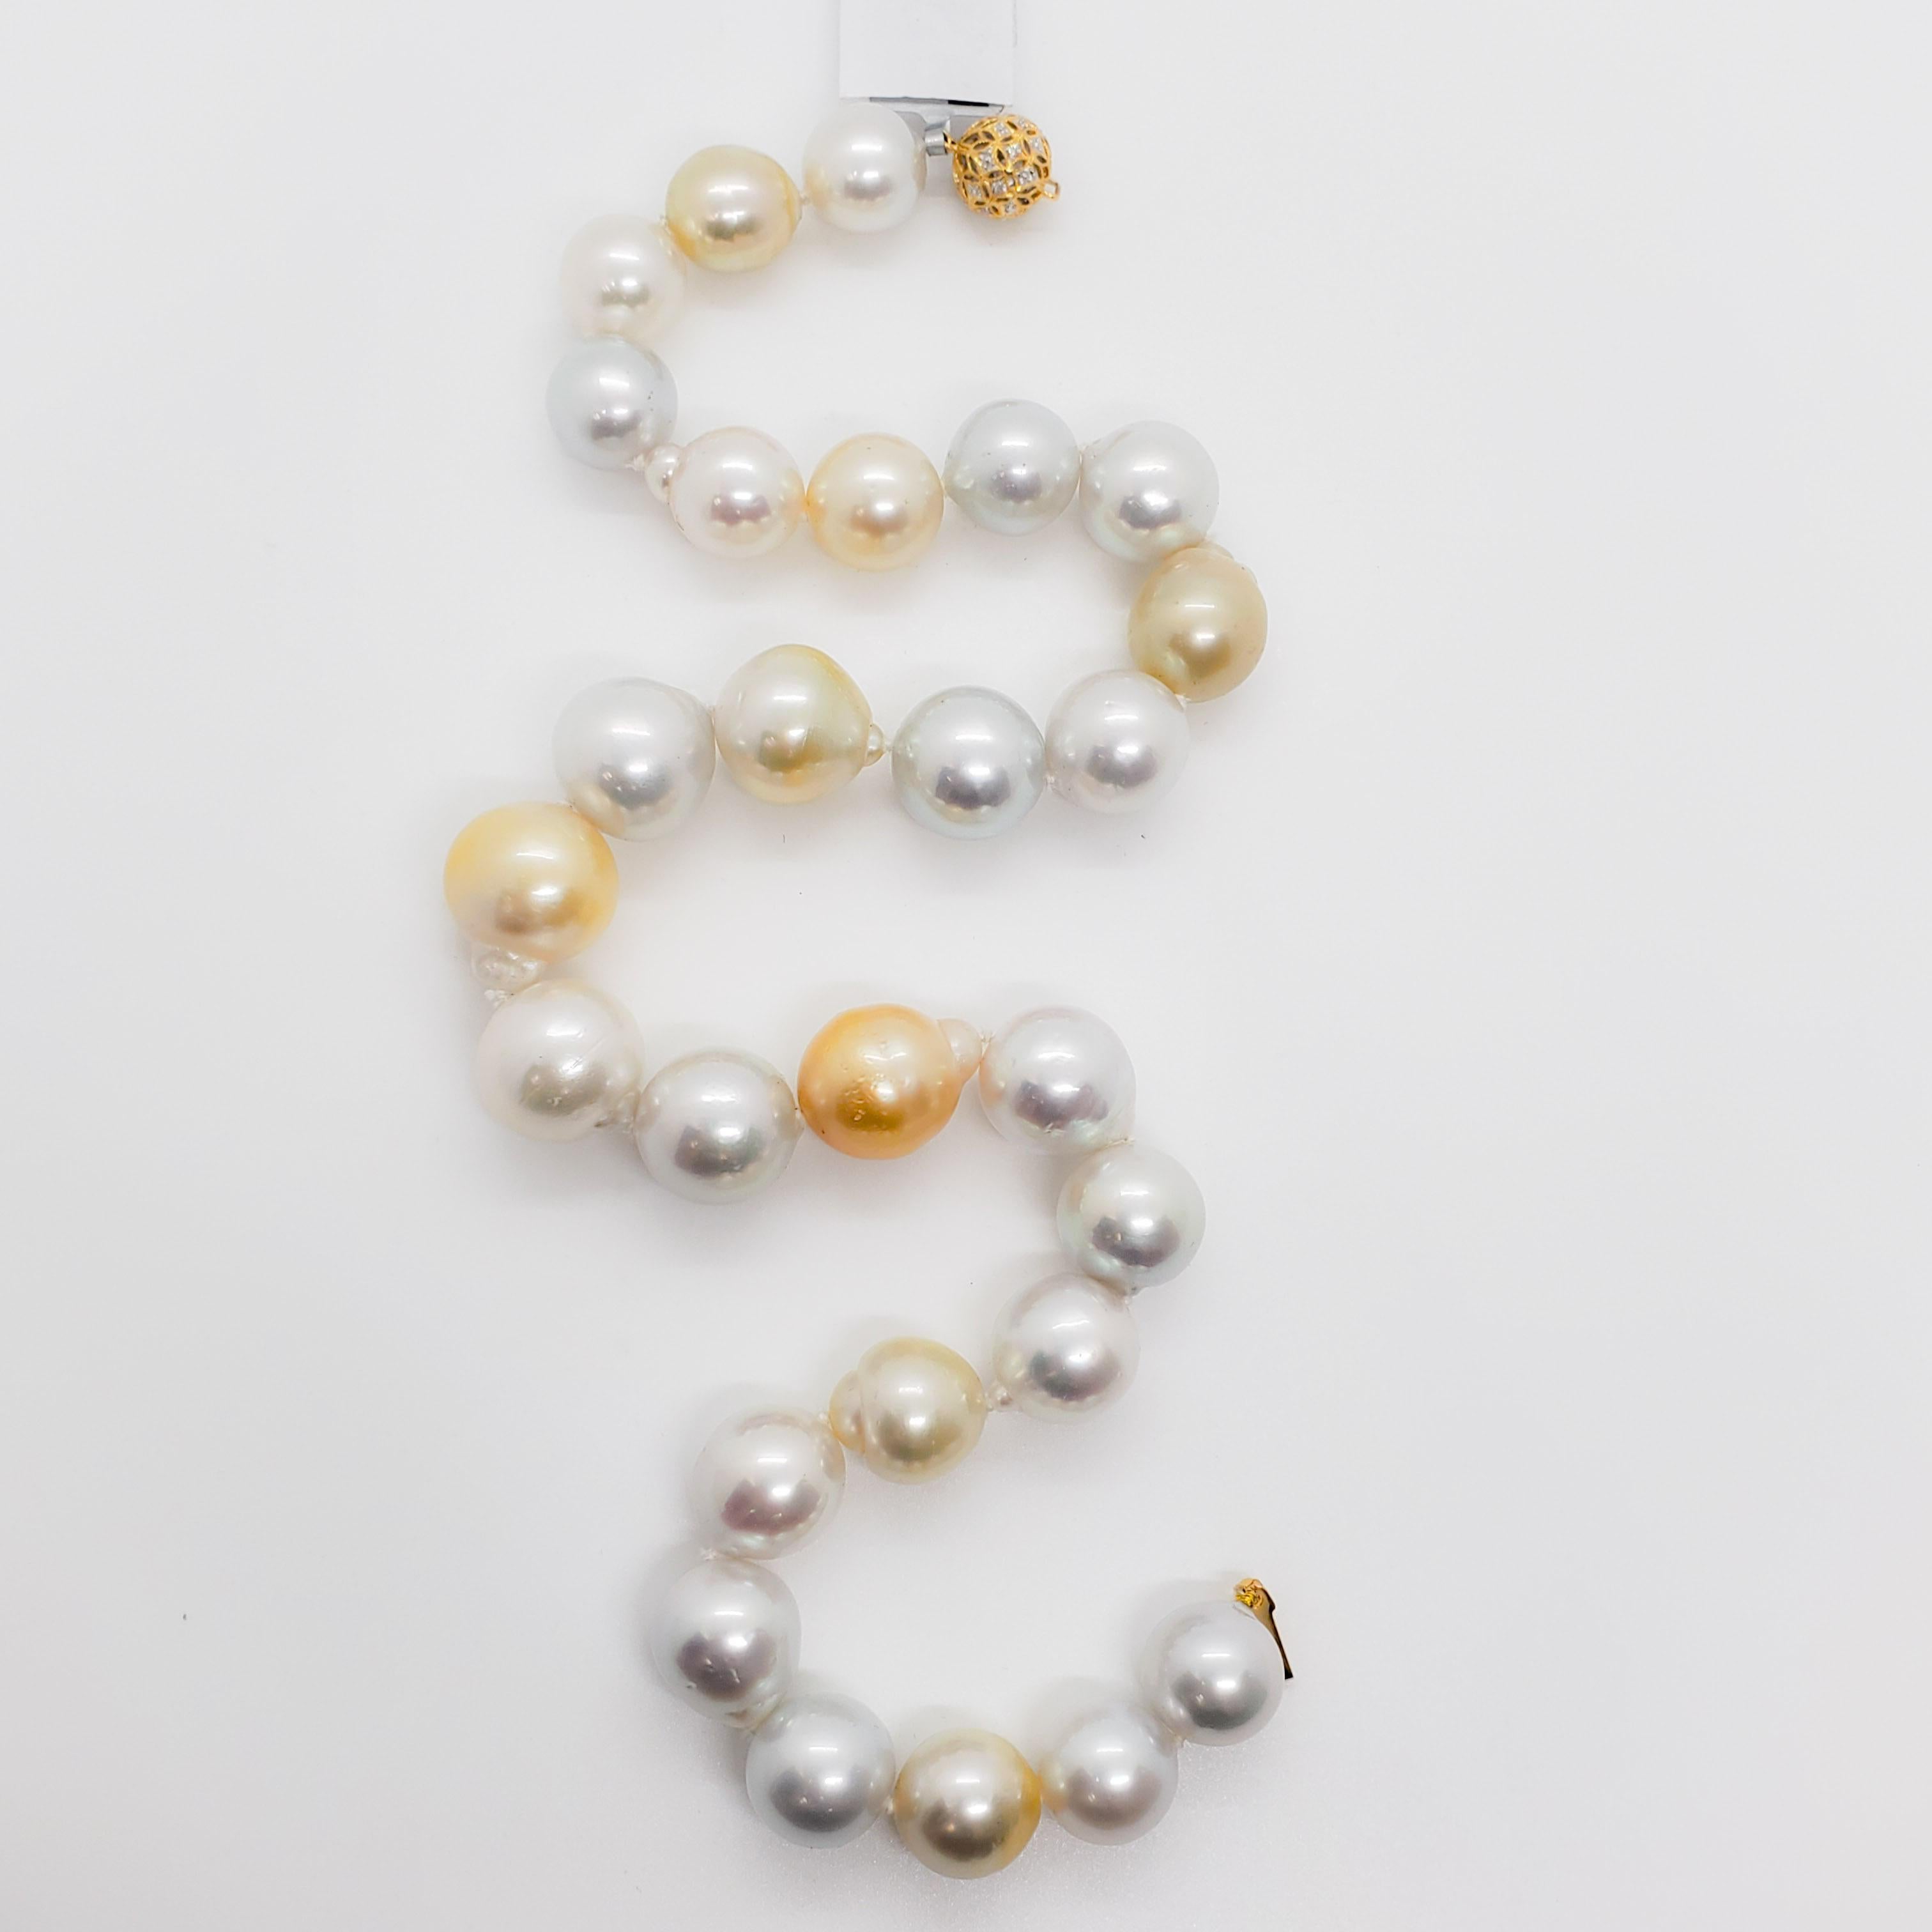  White and Yellow South Sea Pearl Necklace with Diamond Clasp For Sale 4